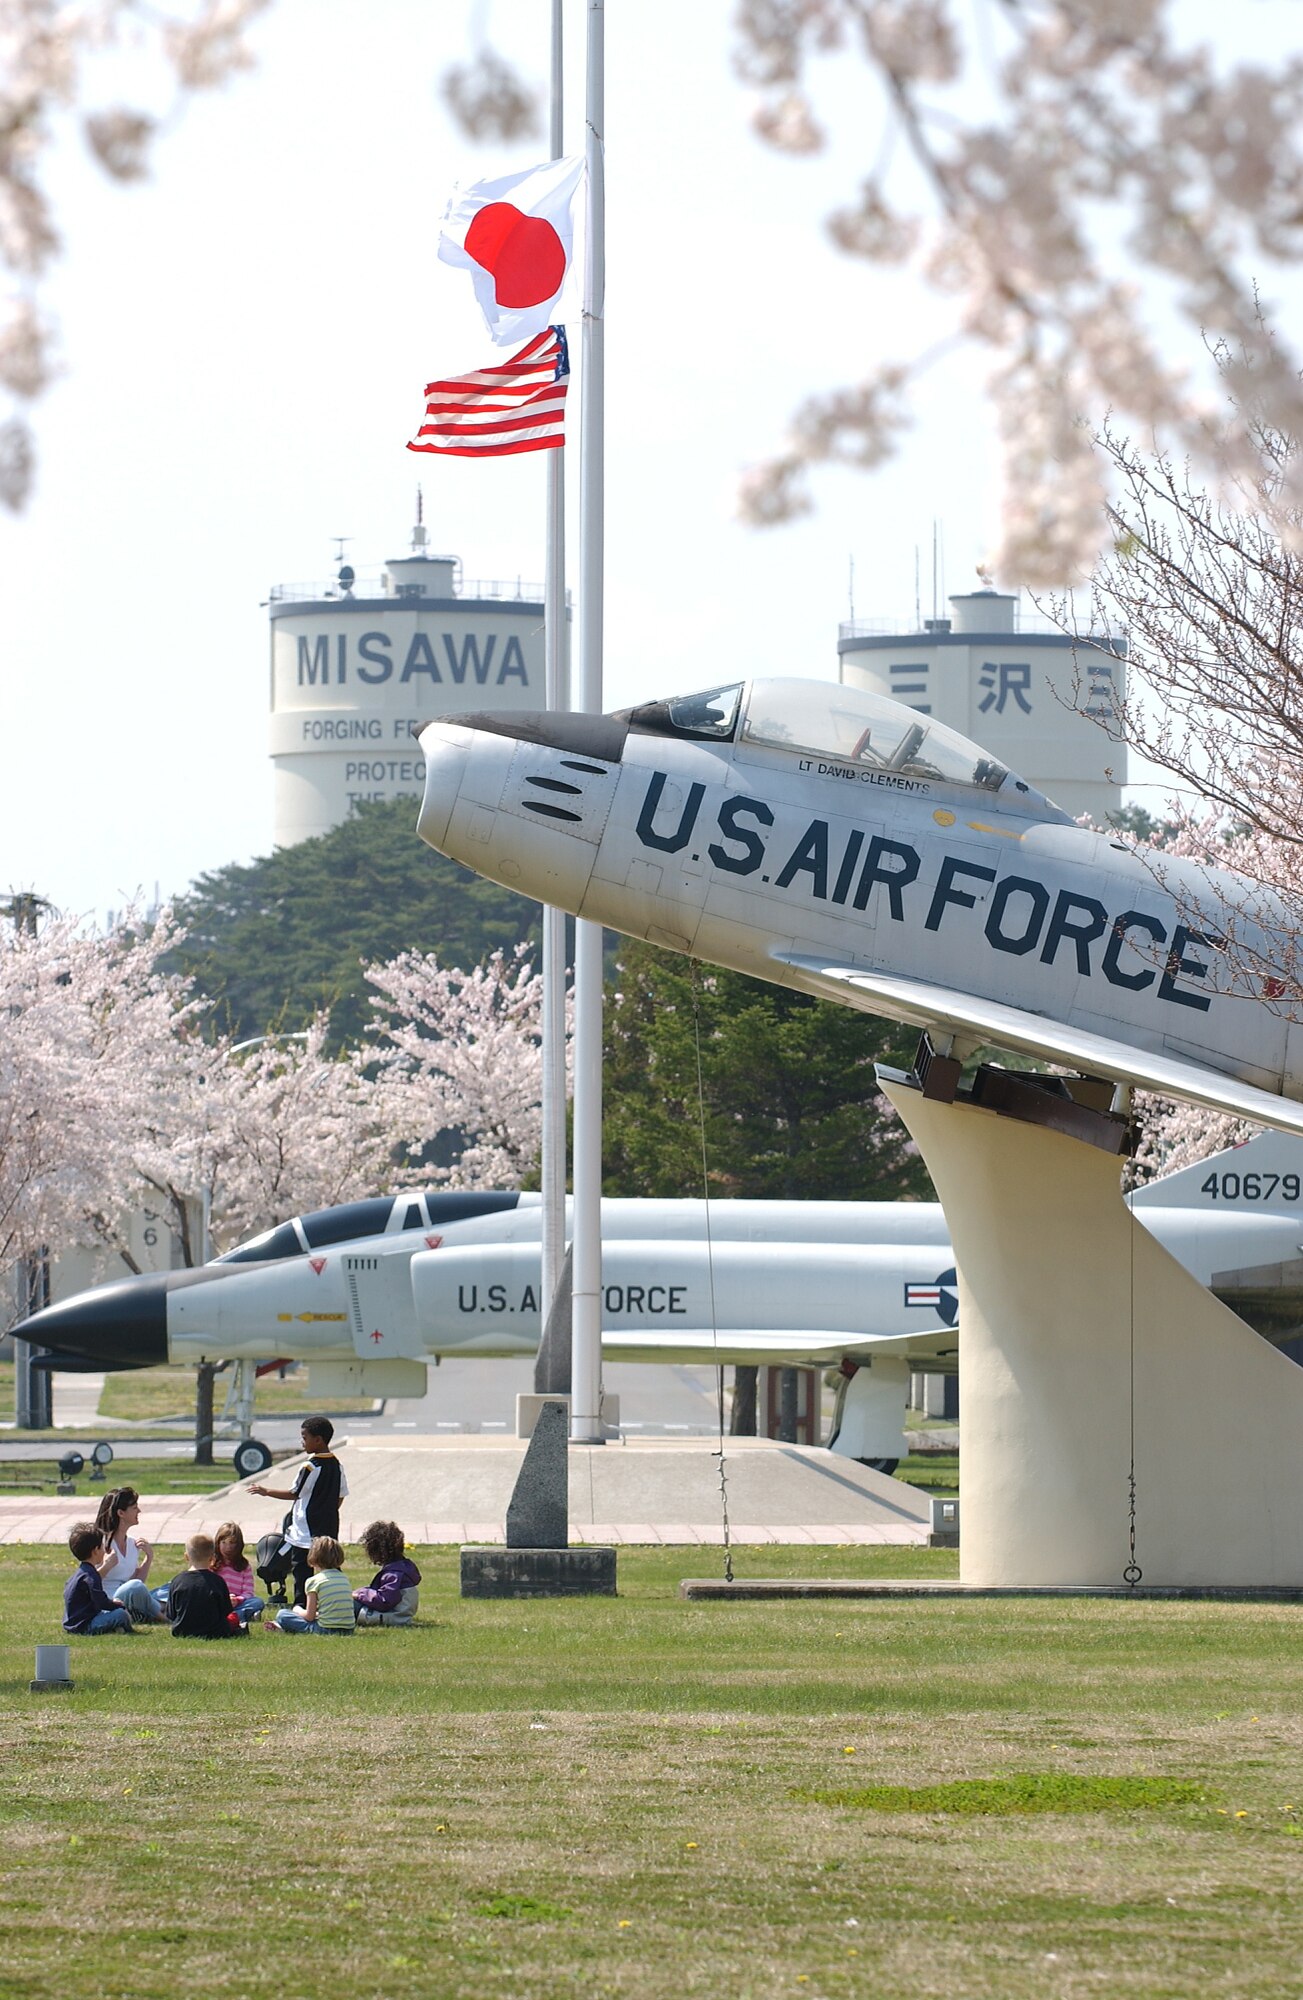 MISAWA AIR BASE, Japan -- Children play at Risner Circle on May 3, 2007.  Risner Circle, lined with Cherry Blossom trees, showcases a U.S. Air Force F-4 and F-86 jets, commemorating American and Japanese friendship. (U.S. Air Force photo by Airman 1st Class Benjamin Wilson)